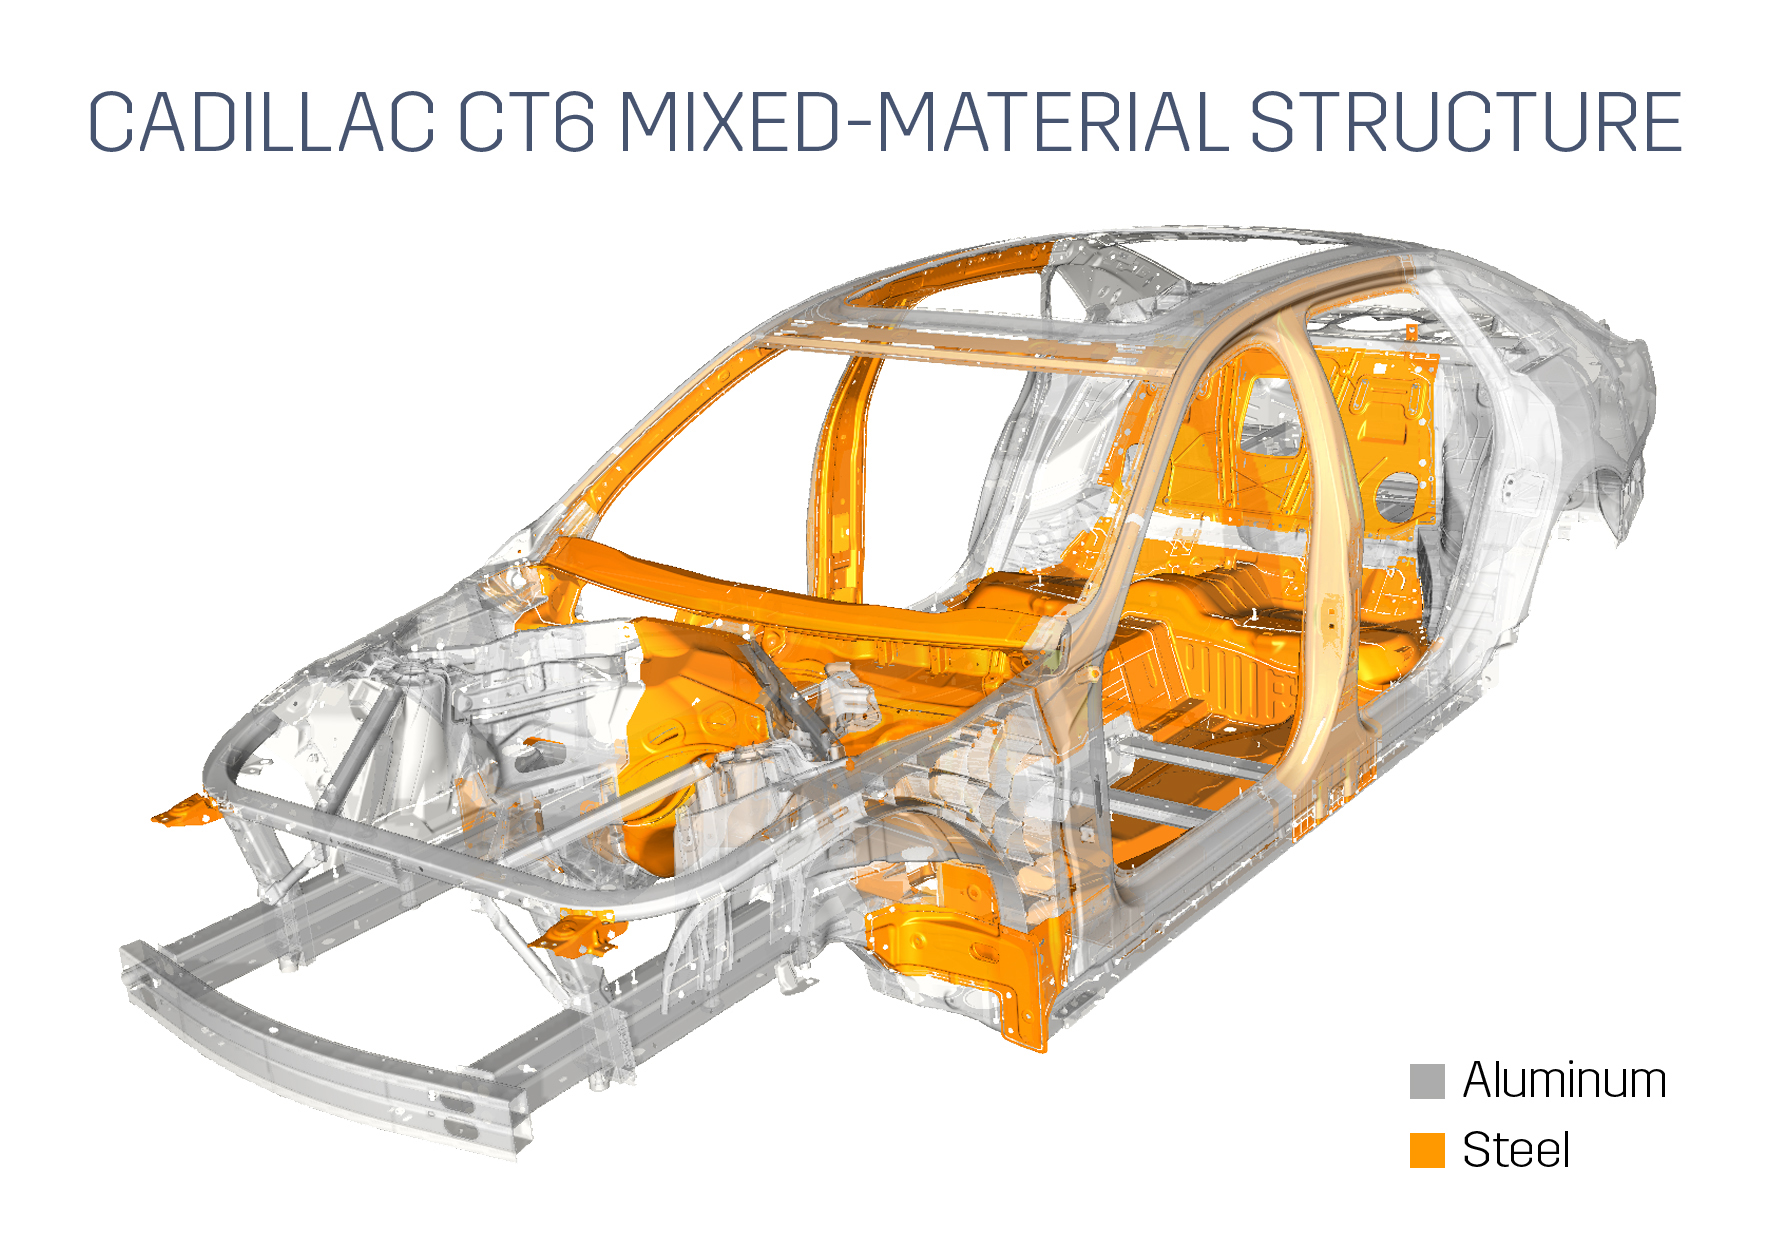 Cadillac CT6 Mixed-Material Structure